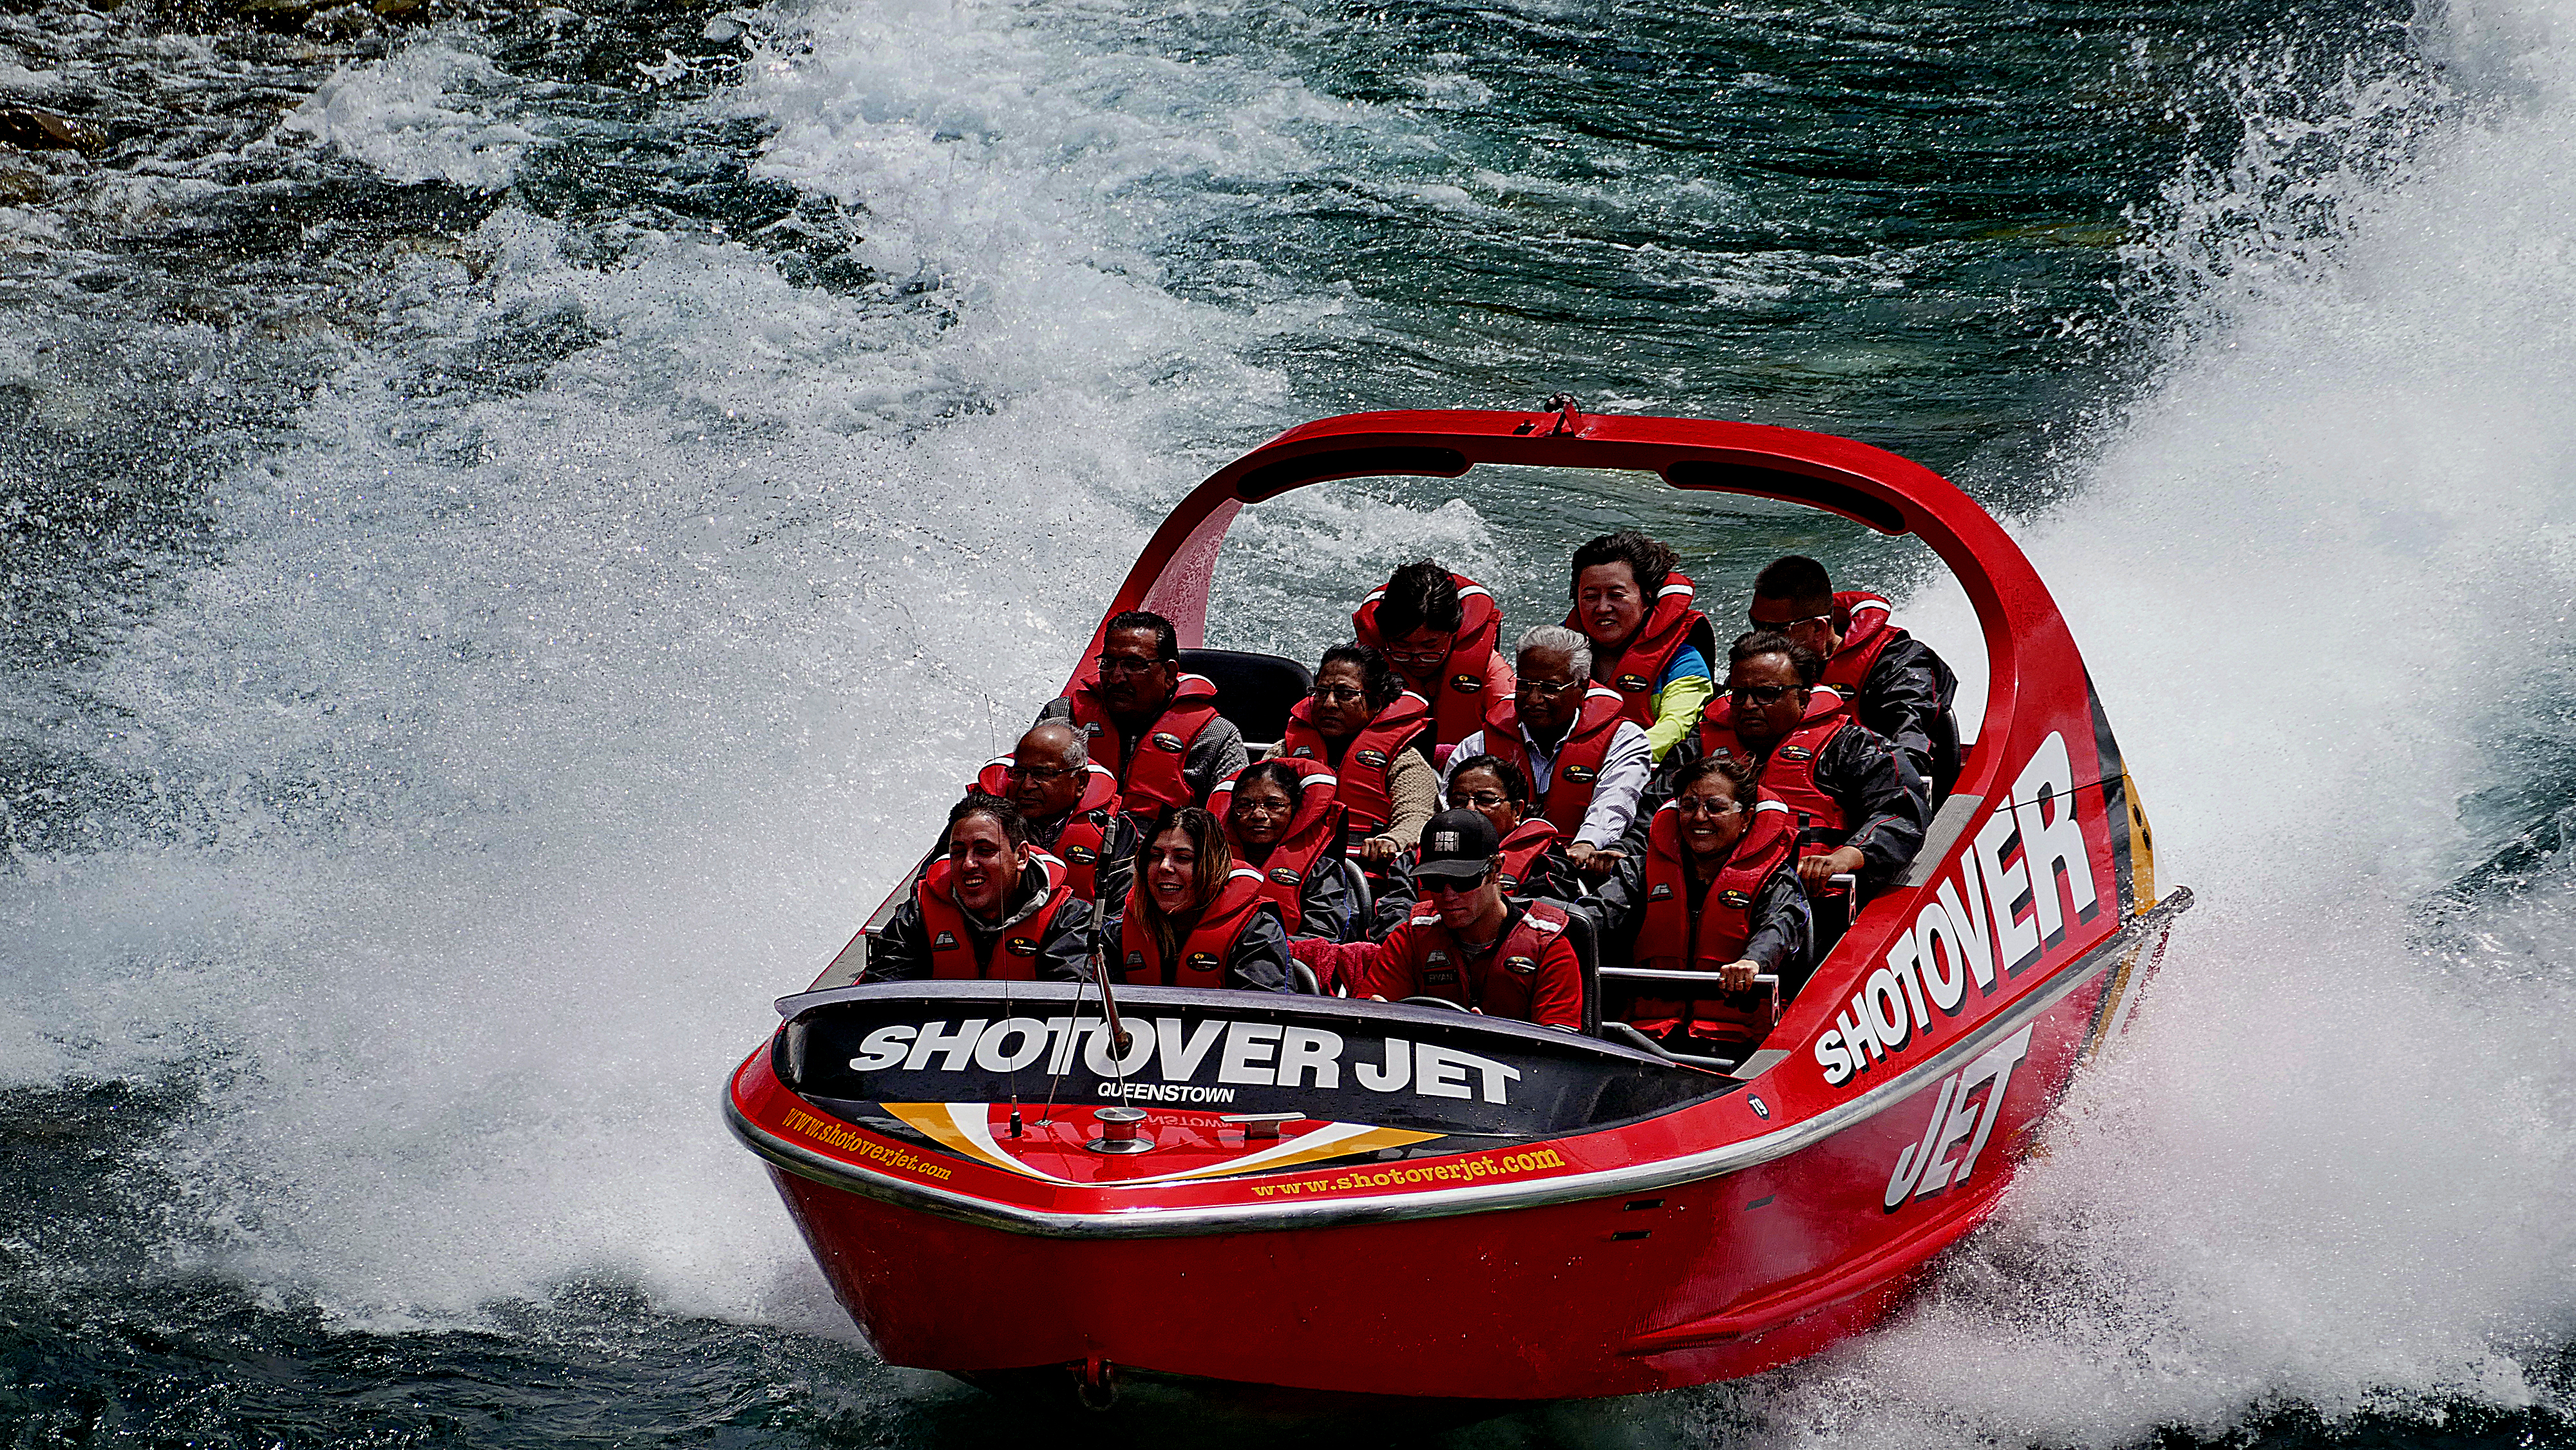 File:Riding the Canyon...The Shotover Jet. (25835877240).jpg - Wikimedia Commons